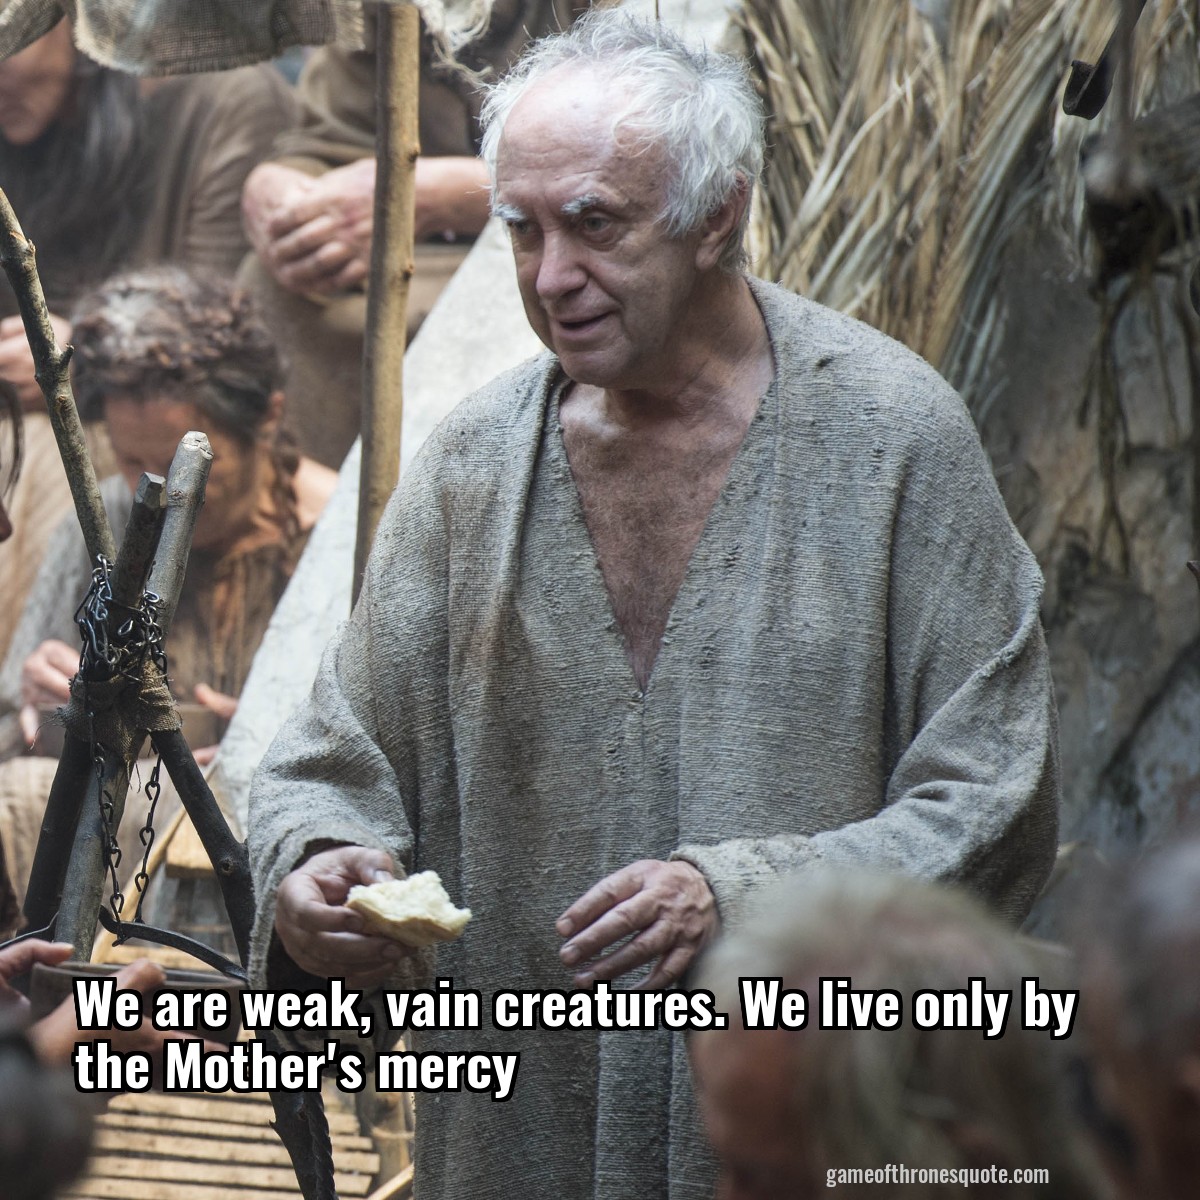 We are weak, vain creatures. We live only by the Mother's mercy